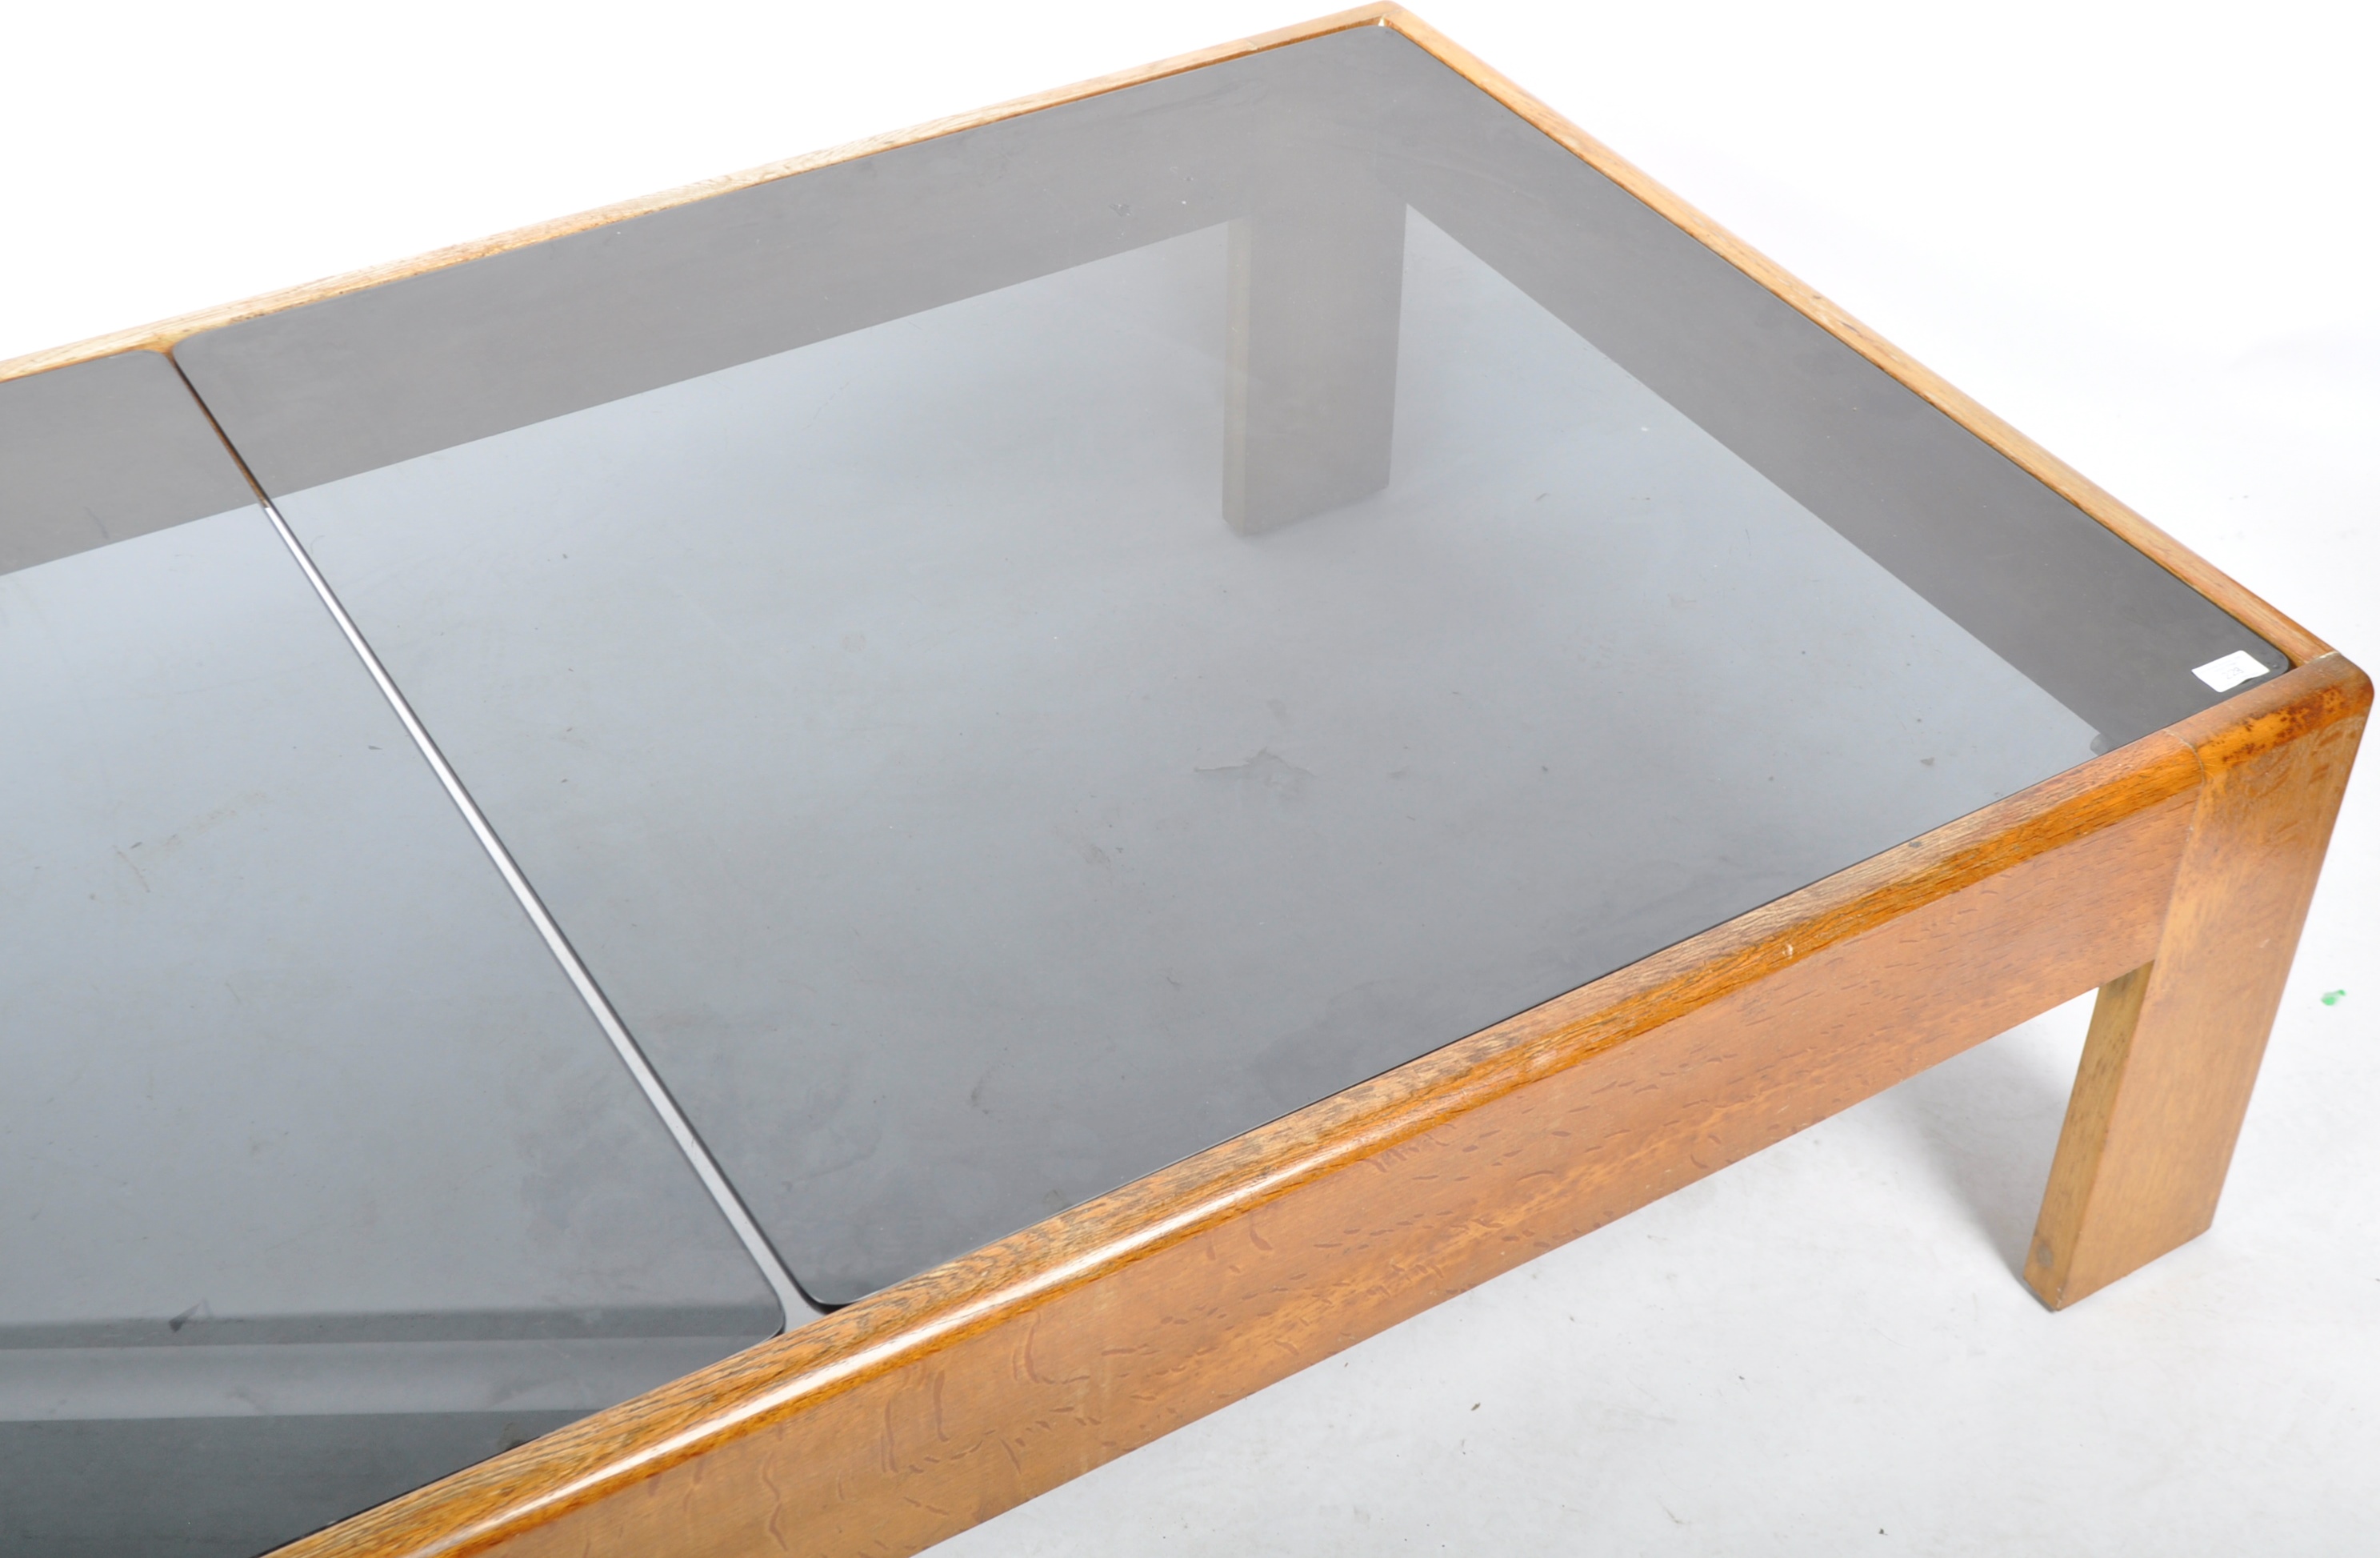 LARGE & IMPRESSIVE OAK AND SMOKEY GLASS TOPPED COFFEE TABLE - Image 4 of 5